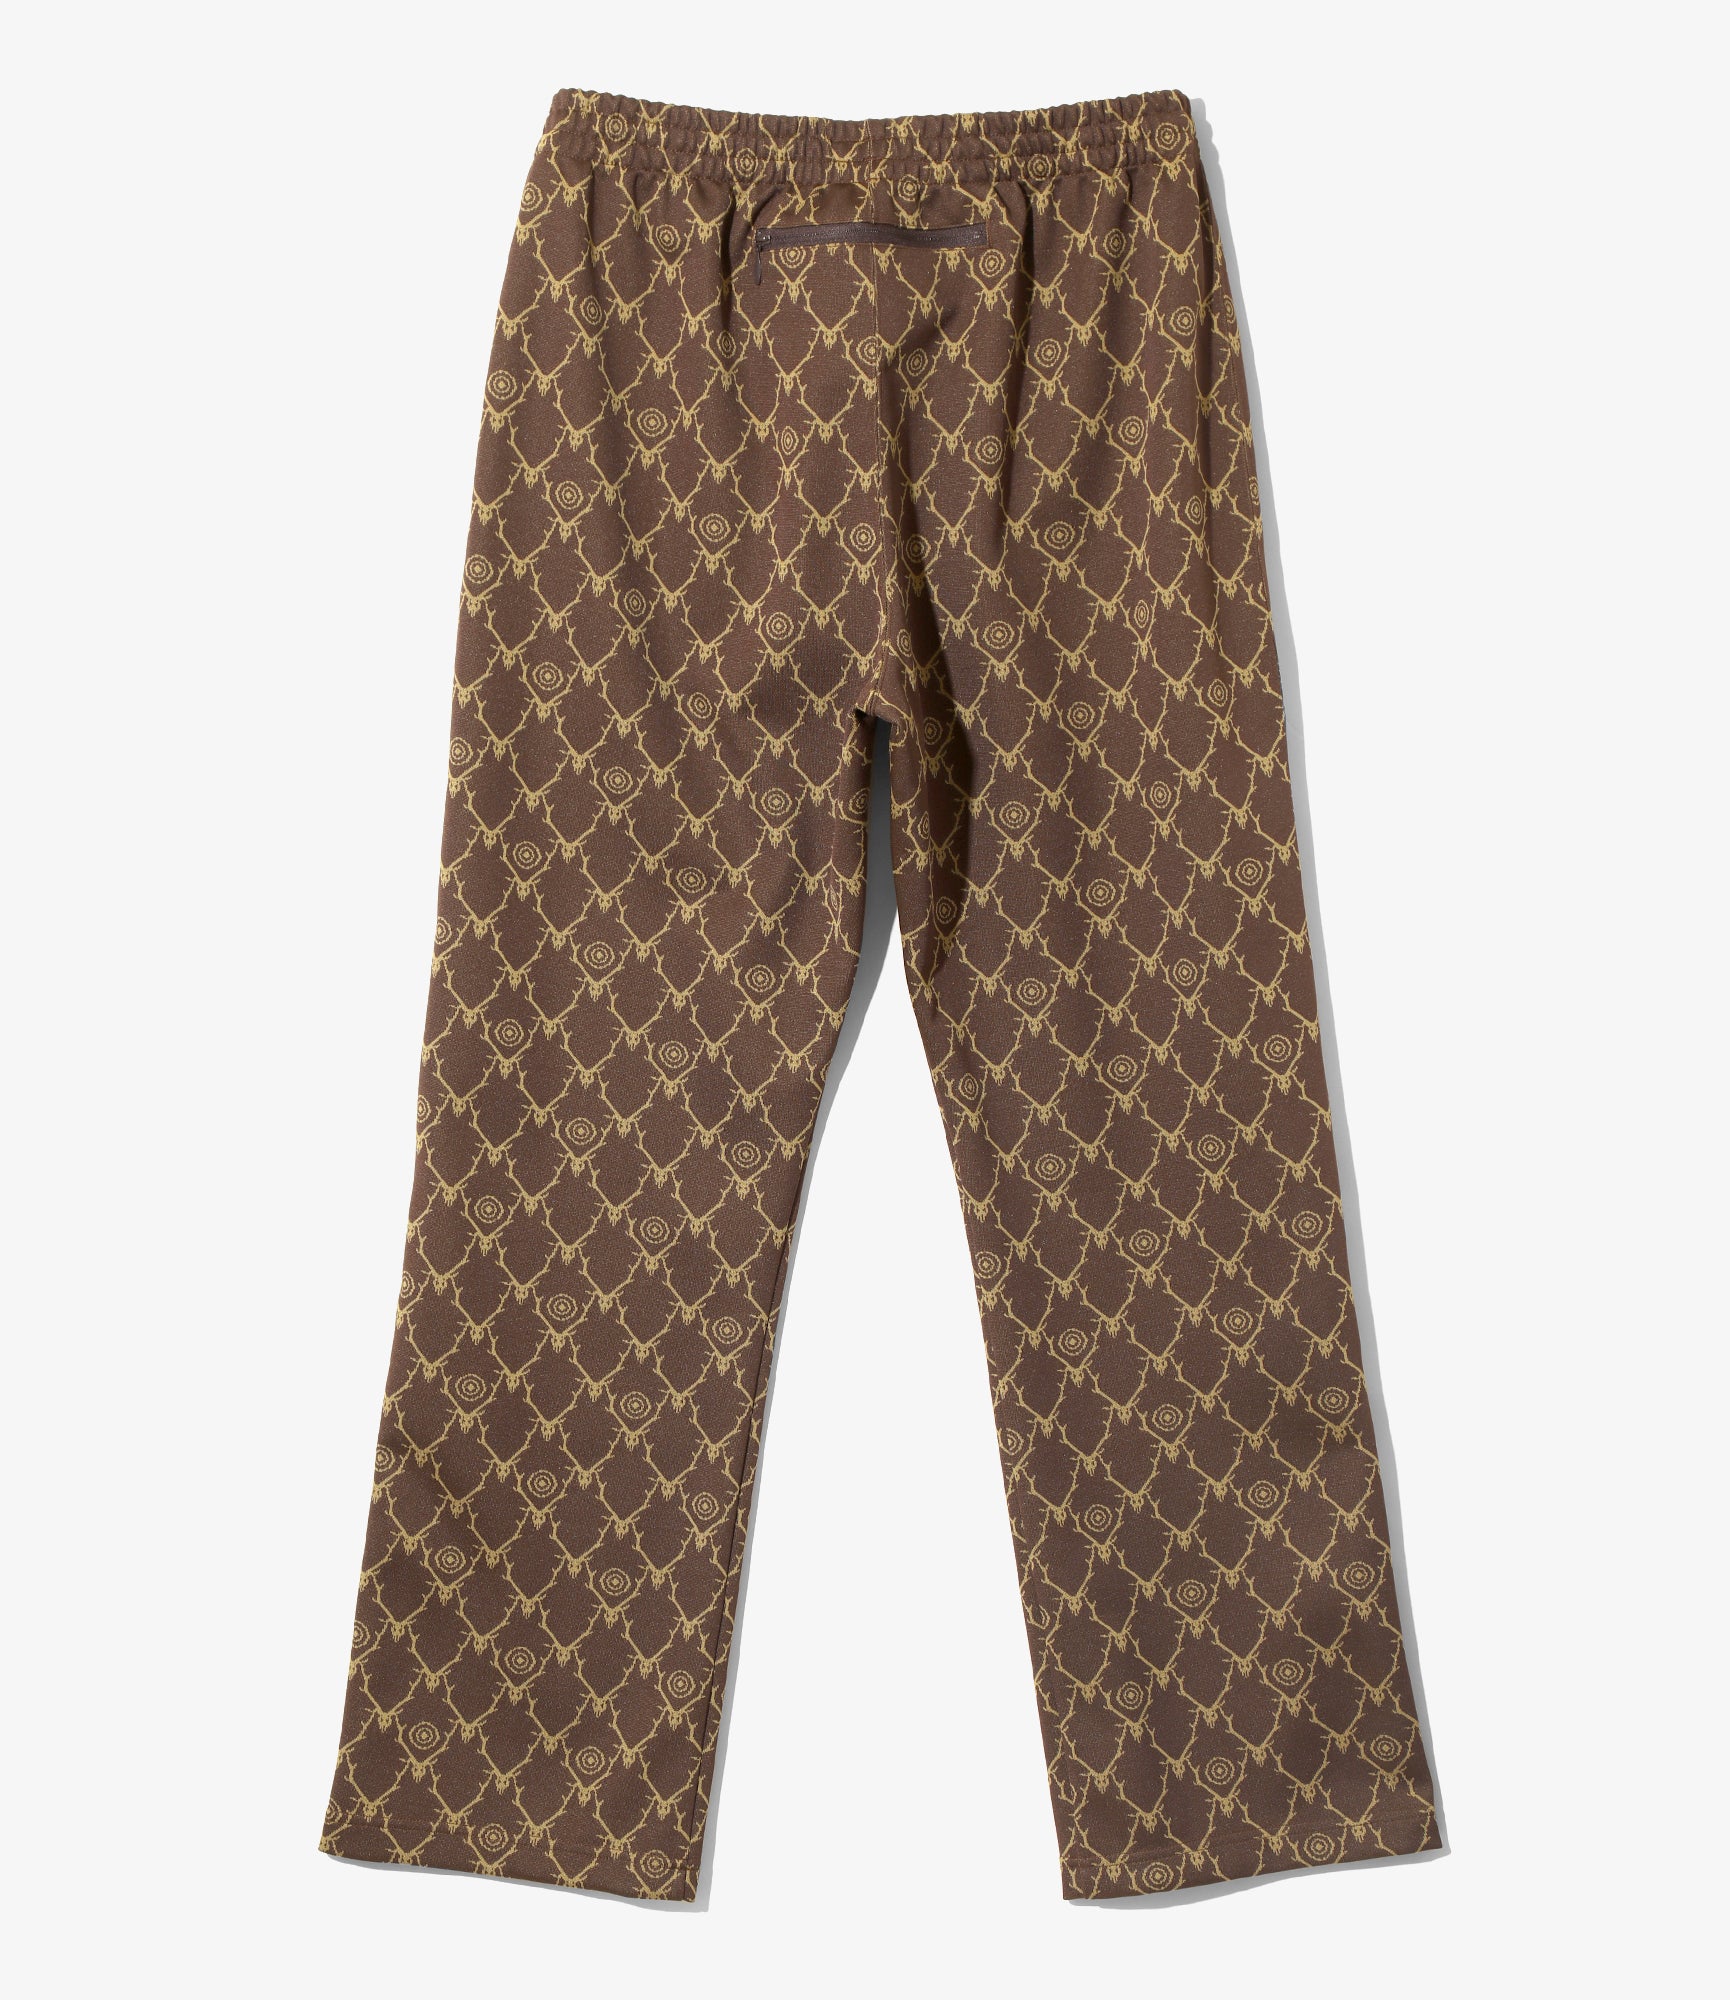 South2 West8 Trainer Pant - Poly Jq / Skull&Target - Brown